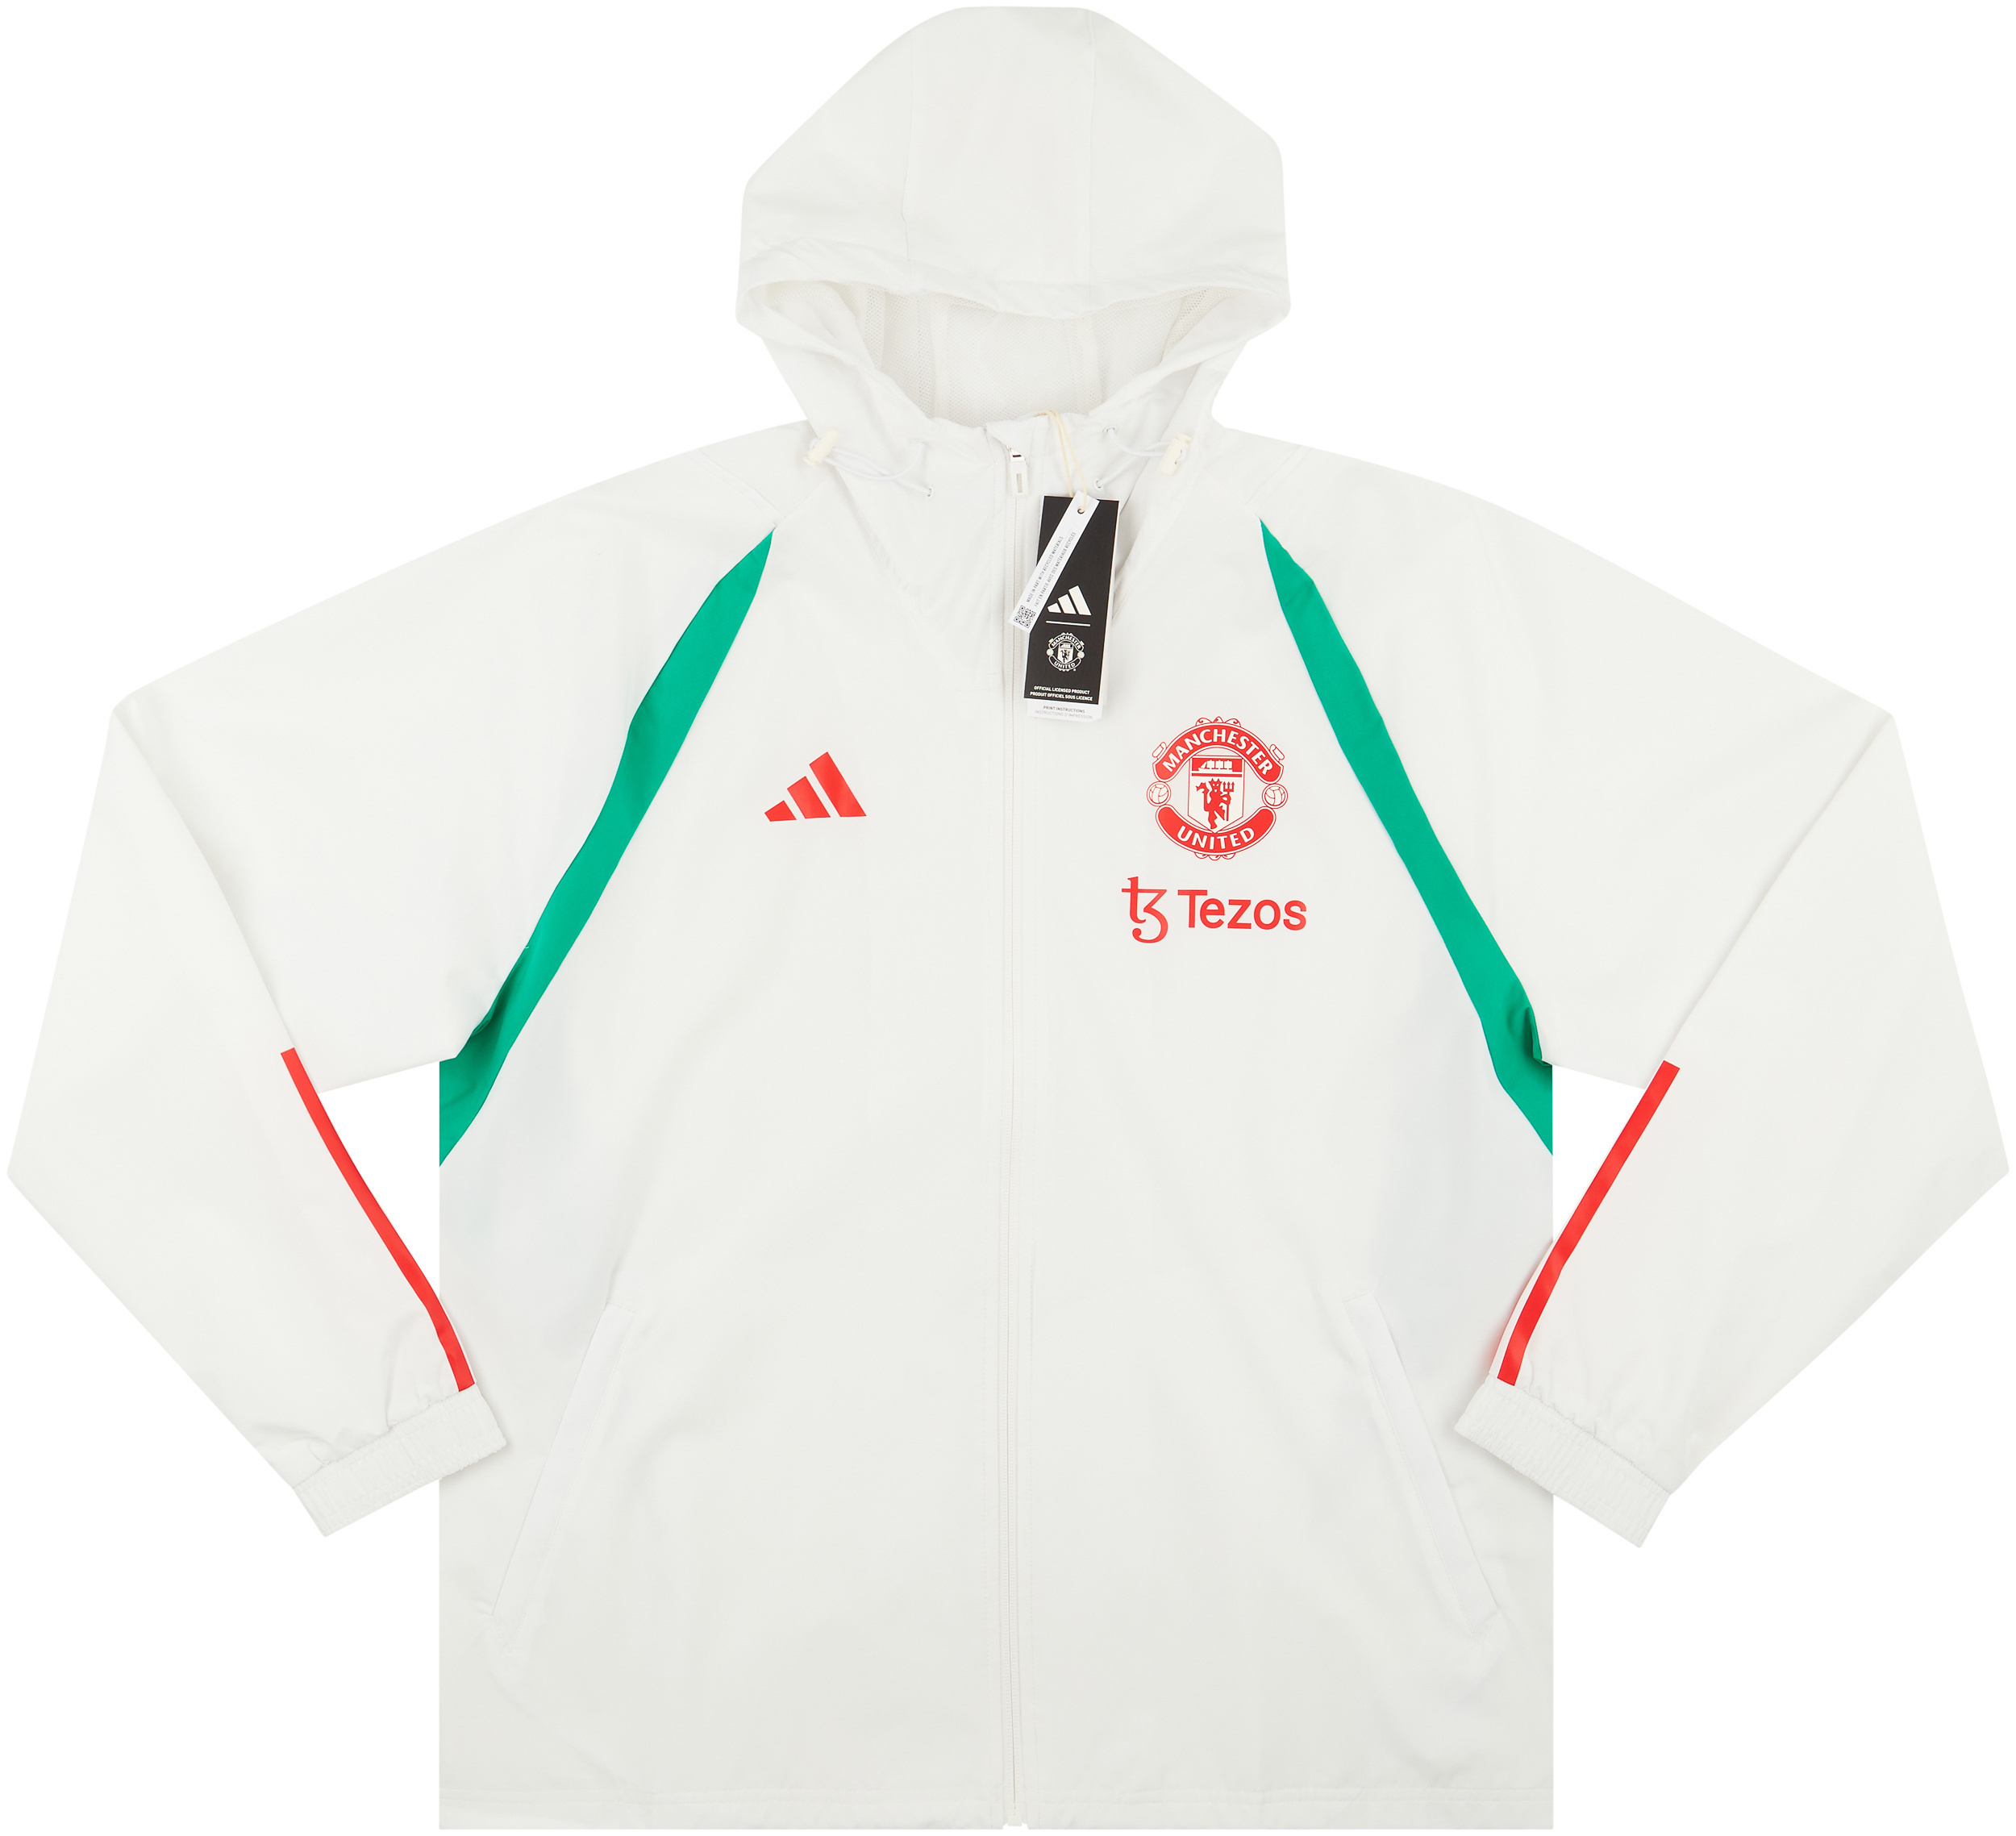 2023-24 Manchester United adidas All-Weather Jacket - NEW